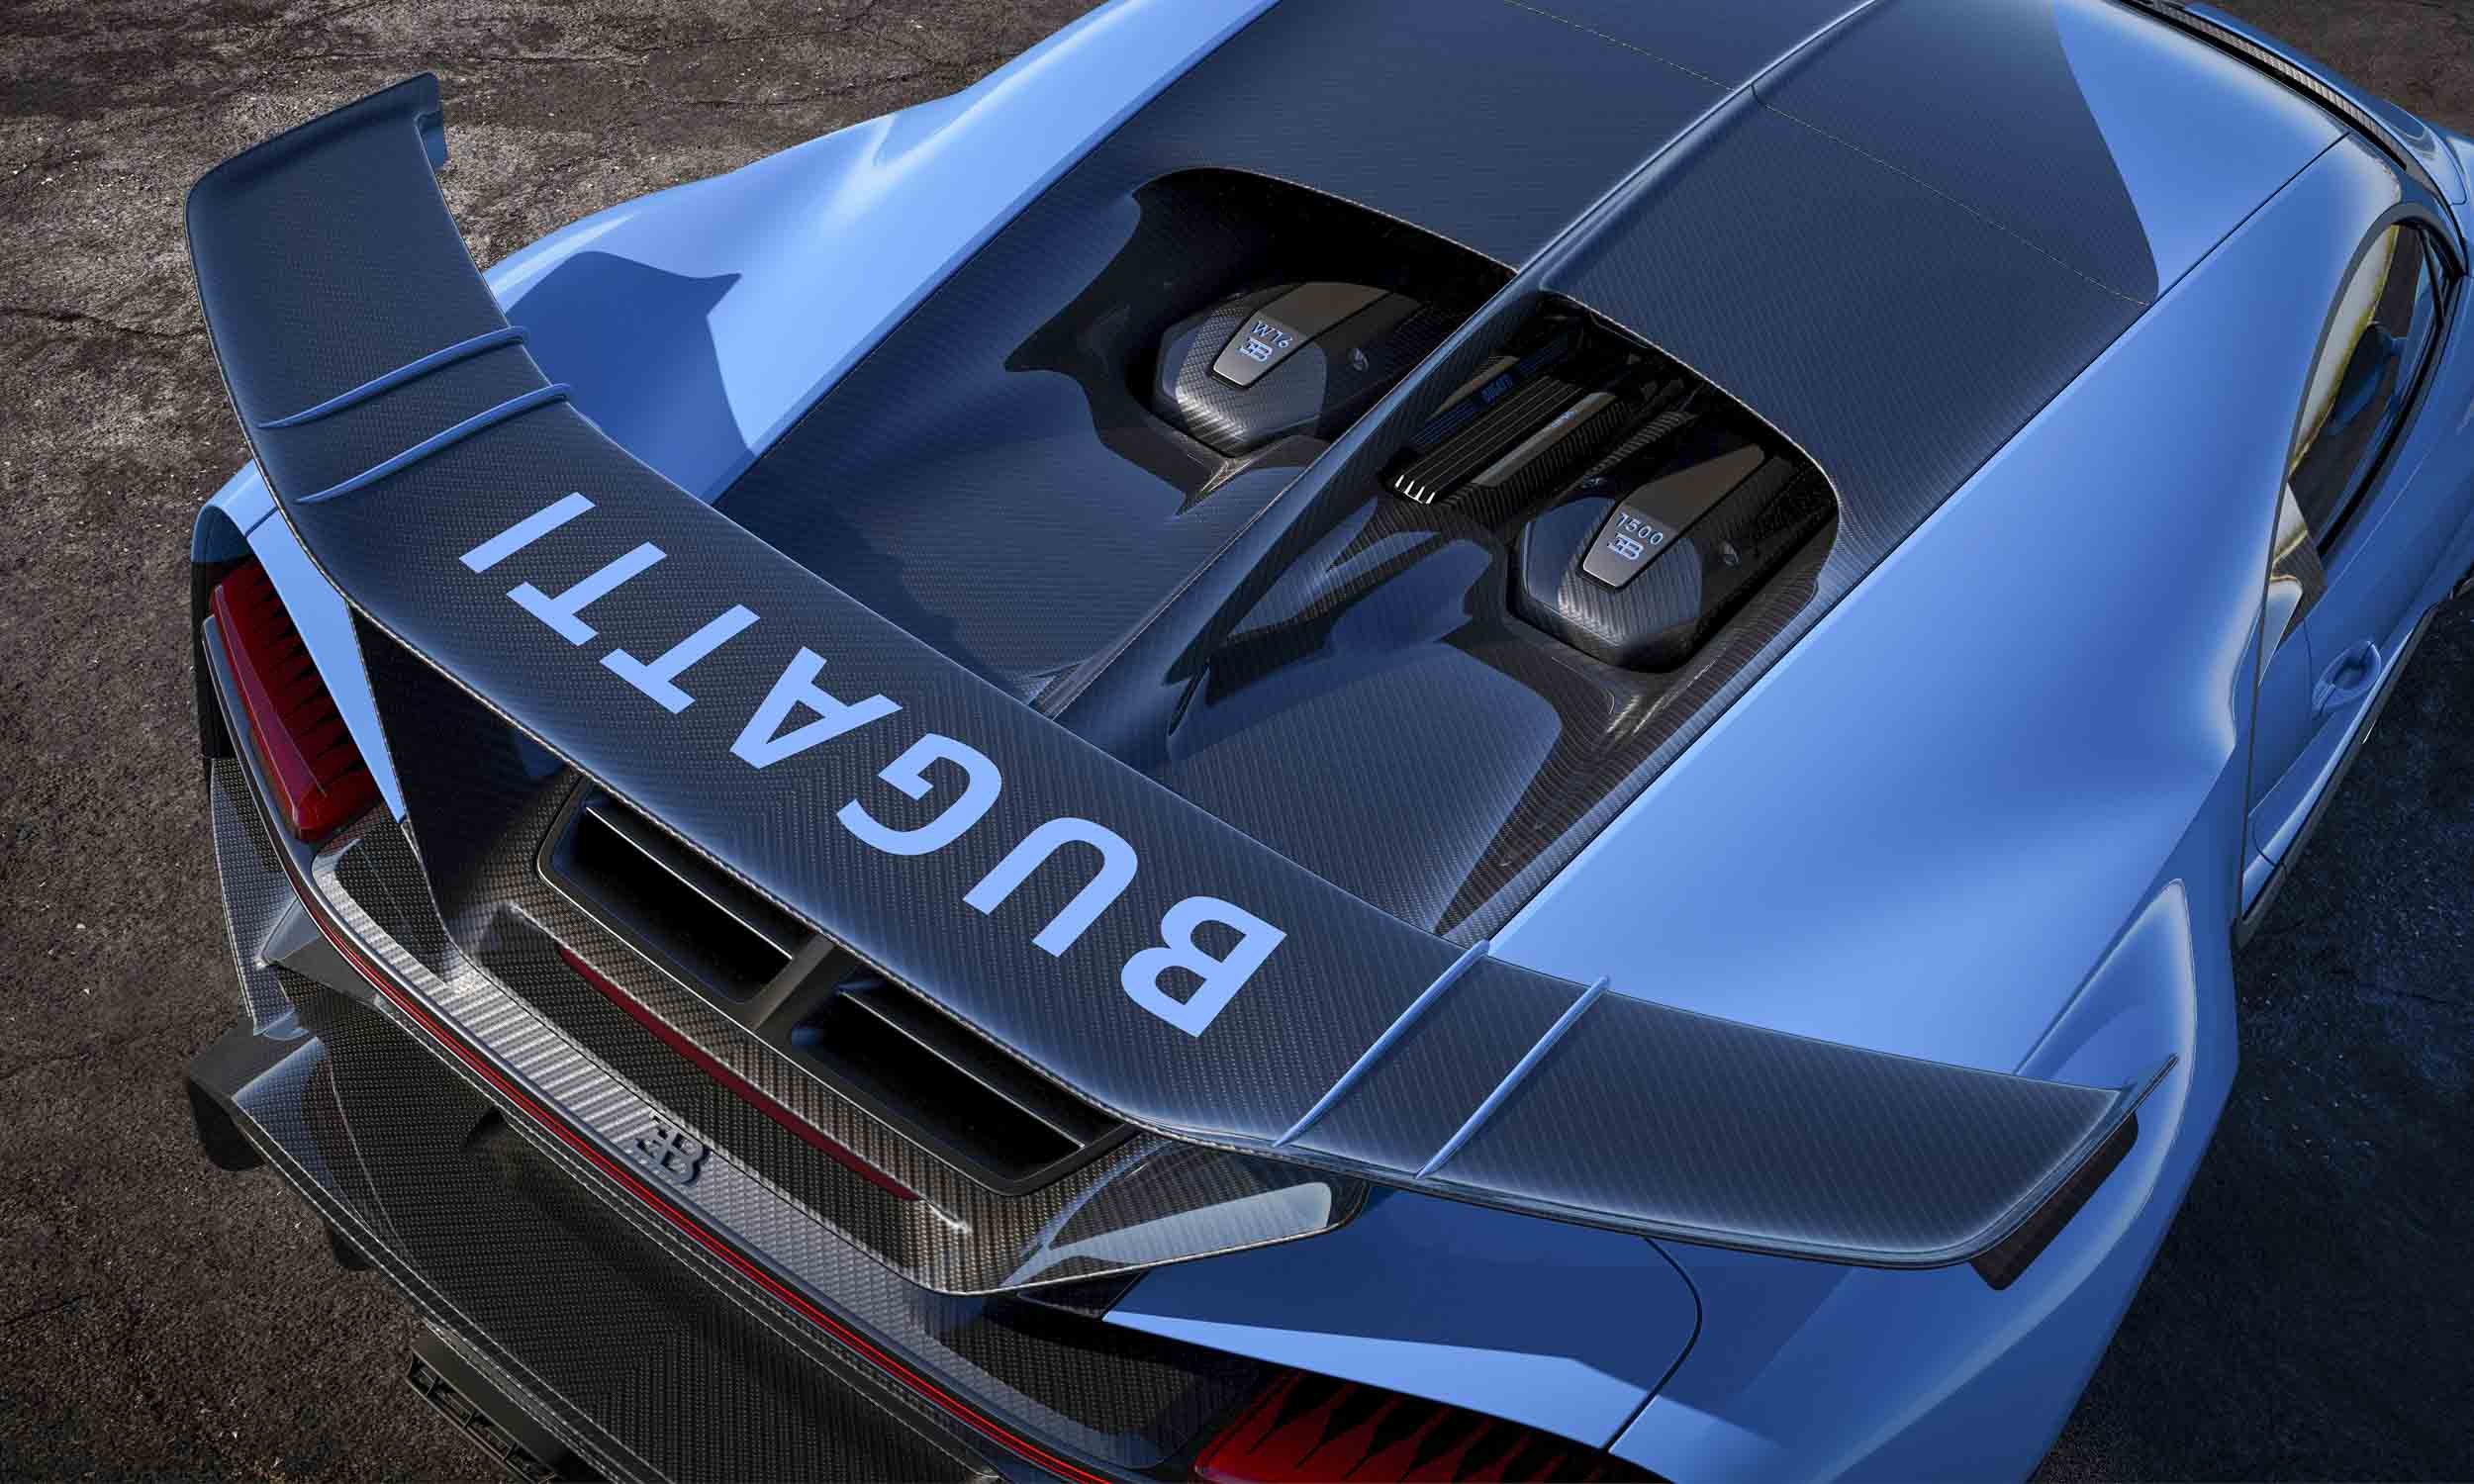 <p>          Details regarding the next hypercar from Bugatti are still scarce, but we do know it will have an electrified platform as well as an all-new V16 engine. With a completely new design inspired by legendary Bugattis like the Type 57 SC Atlantic, the Type 41 Royale, and the Type 35, this new sports car will be pure Bugatti. The new model will debut on June 20, so stay tuned.         </p>